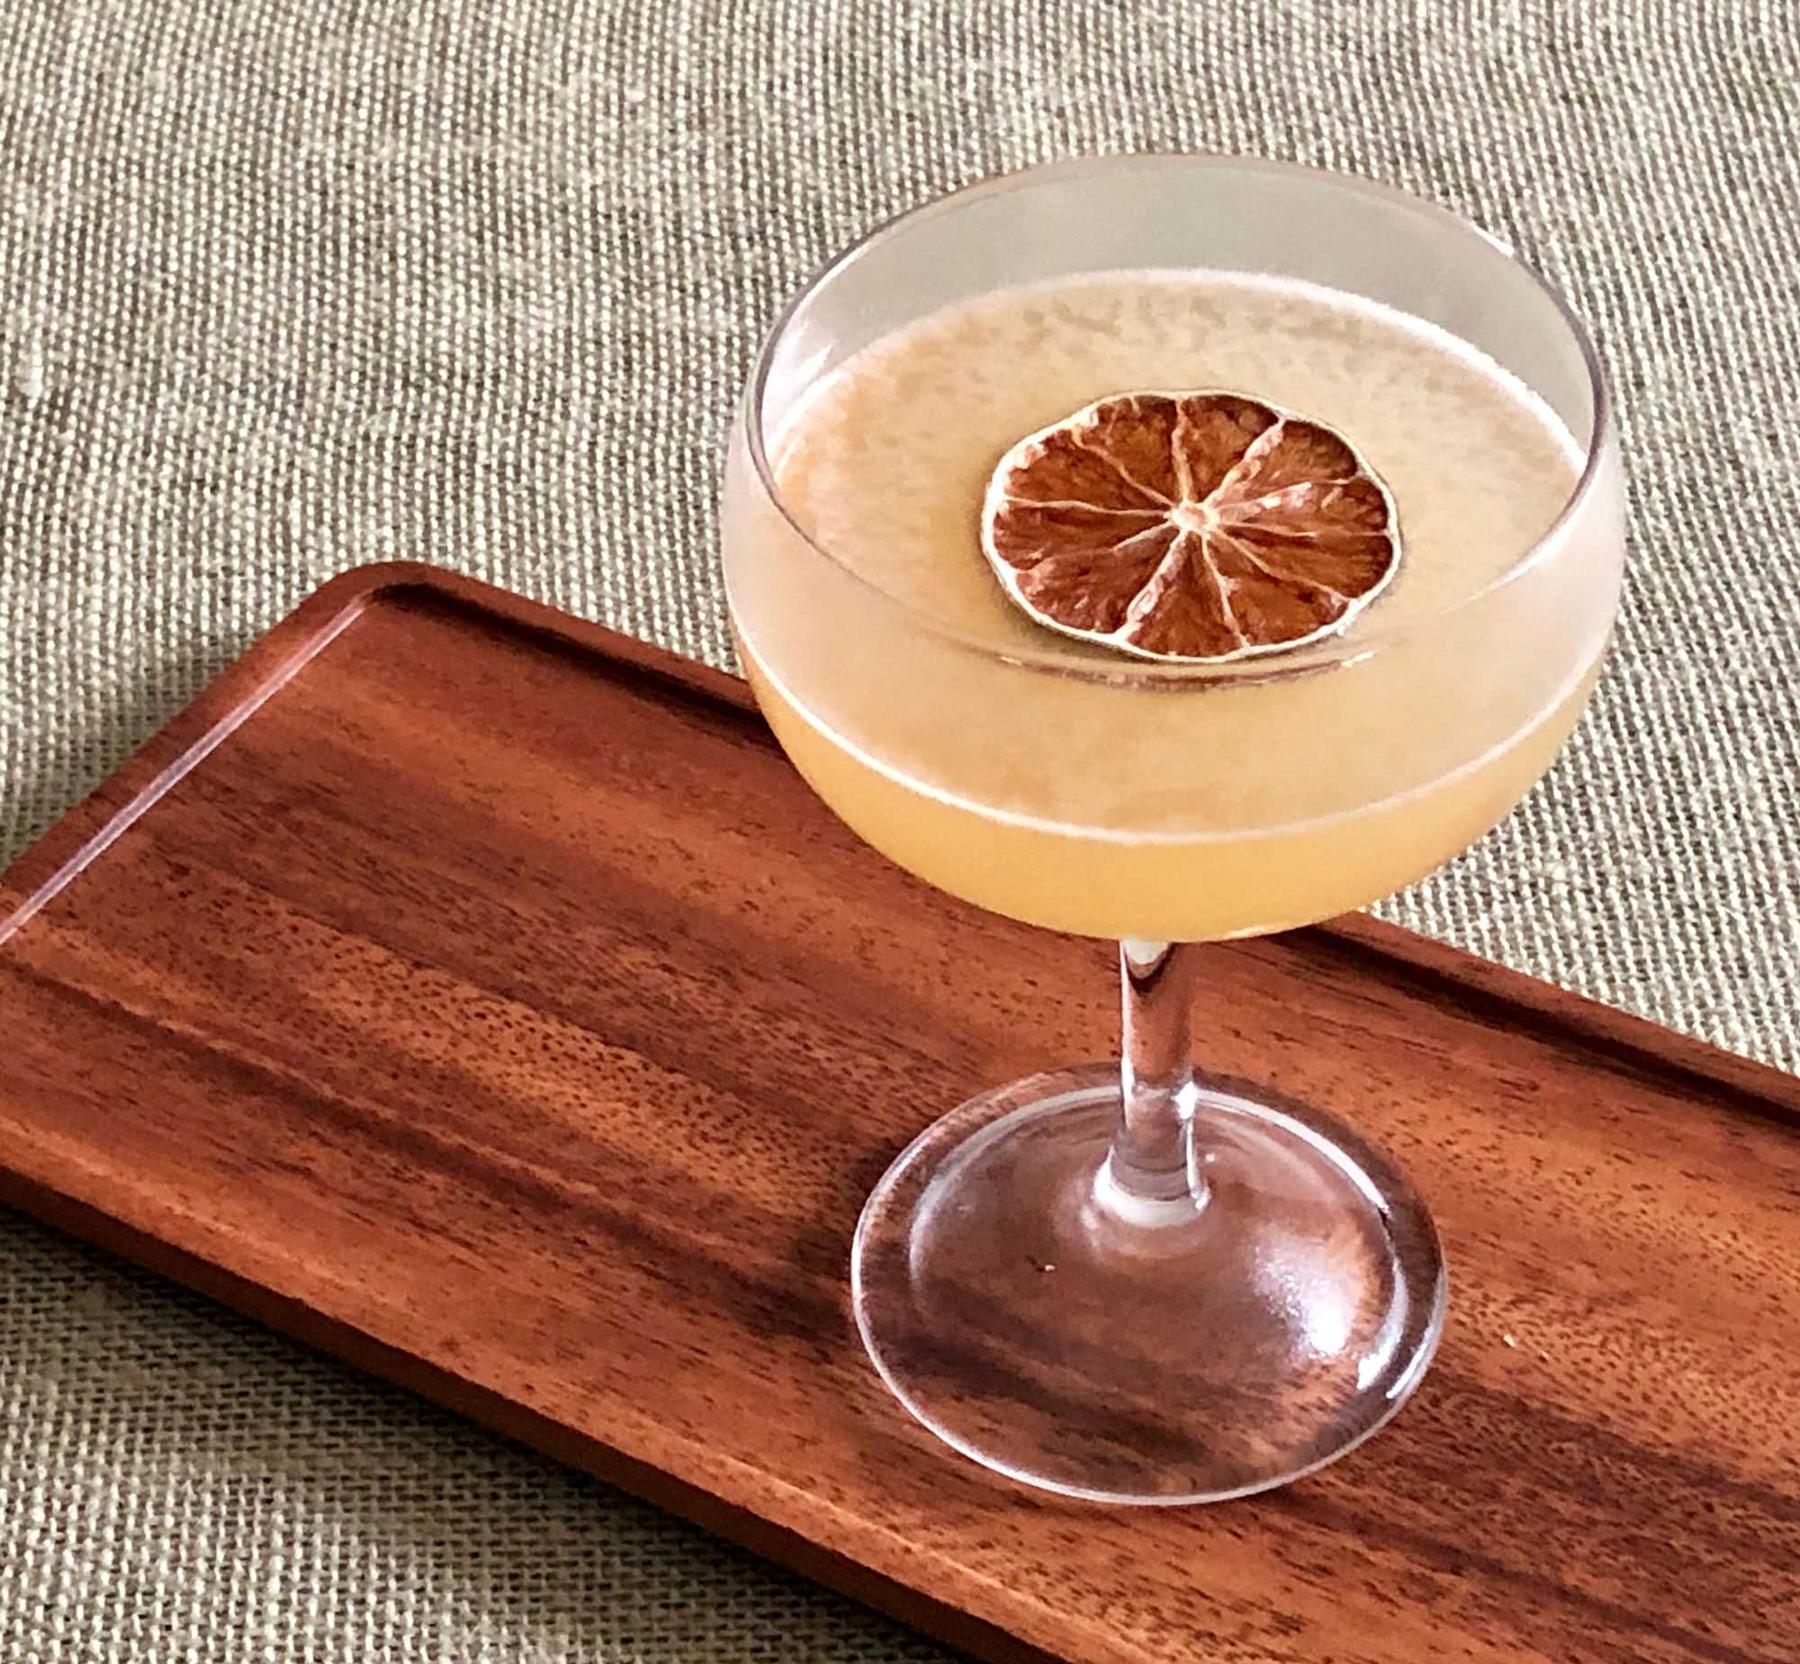 An example of the To The Sun, the mixed drink (drink) featuring Smith & Cross Traditional Jamaica Rum, lime juice, Rothman & Winter Orchard Apricot Liqueur, John D. Taylor’s Velvet Falernum, Angostura bitters, and lime wheel; photo by Lee Edwards